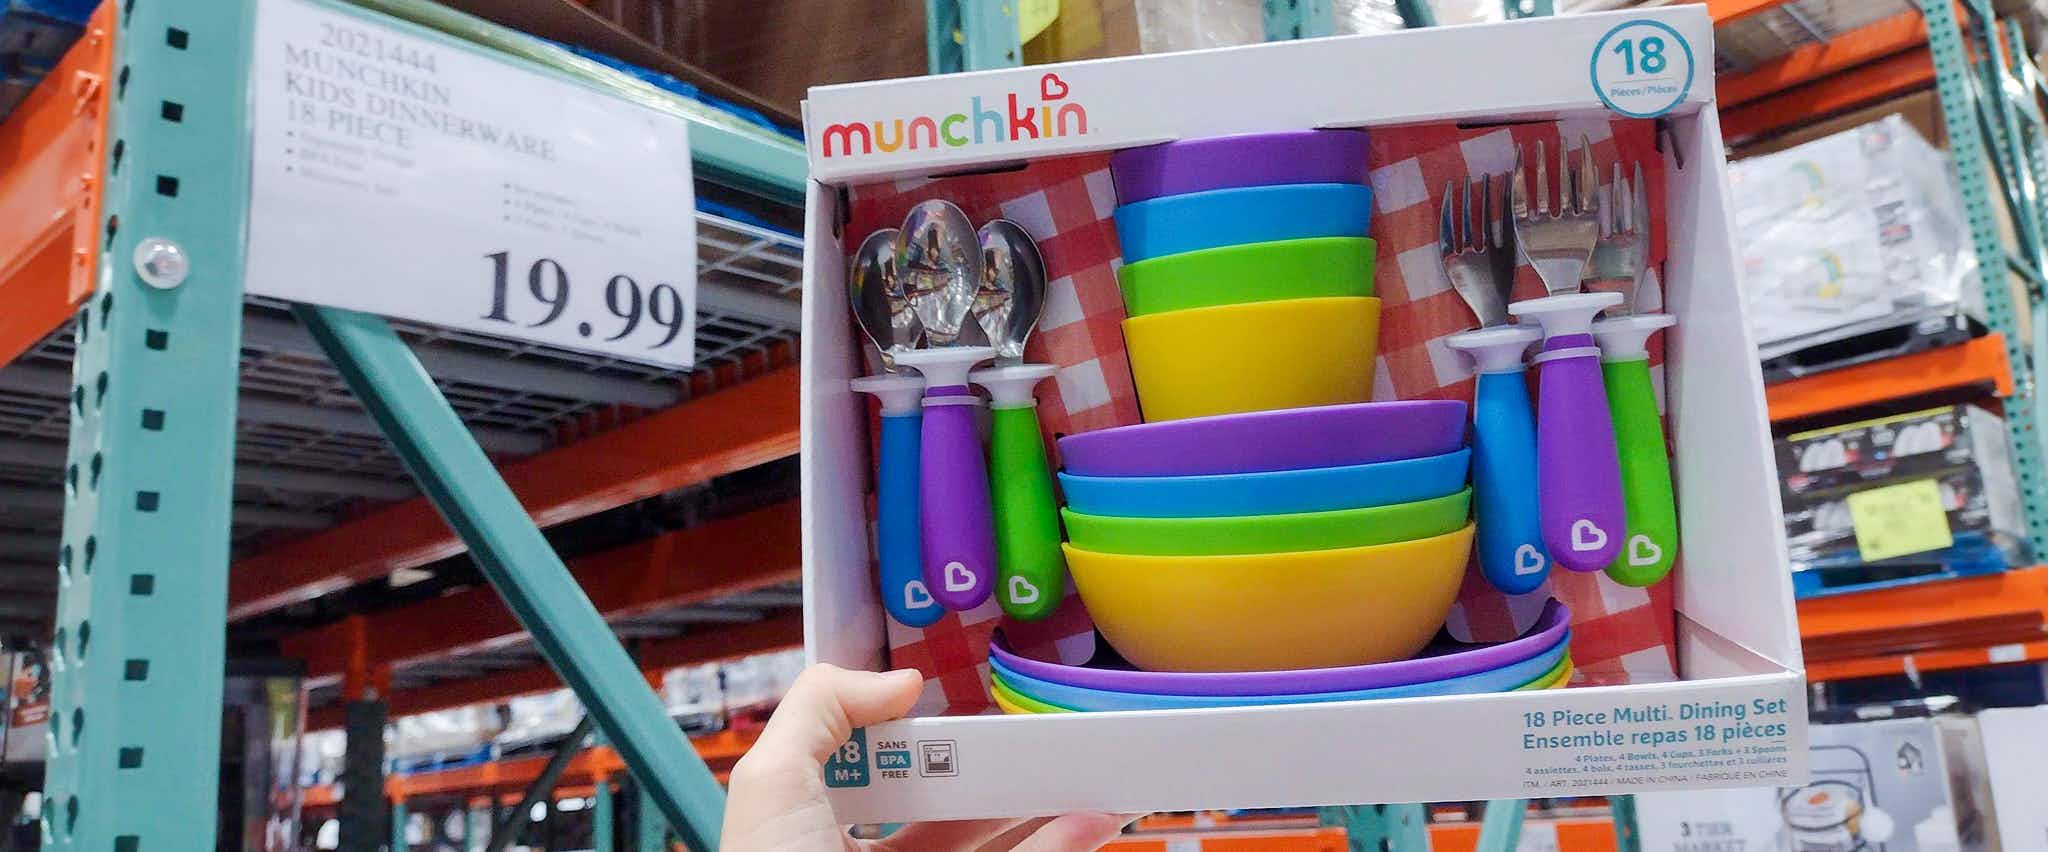 dinnerware set for toddlers held up near sale sign at costco